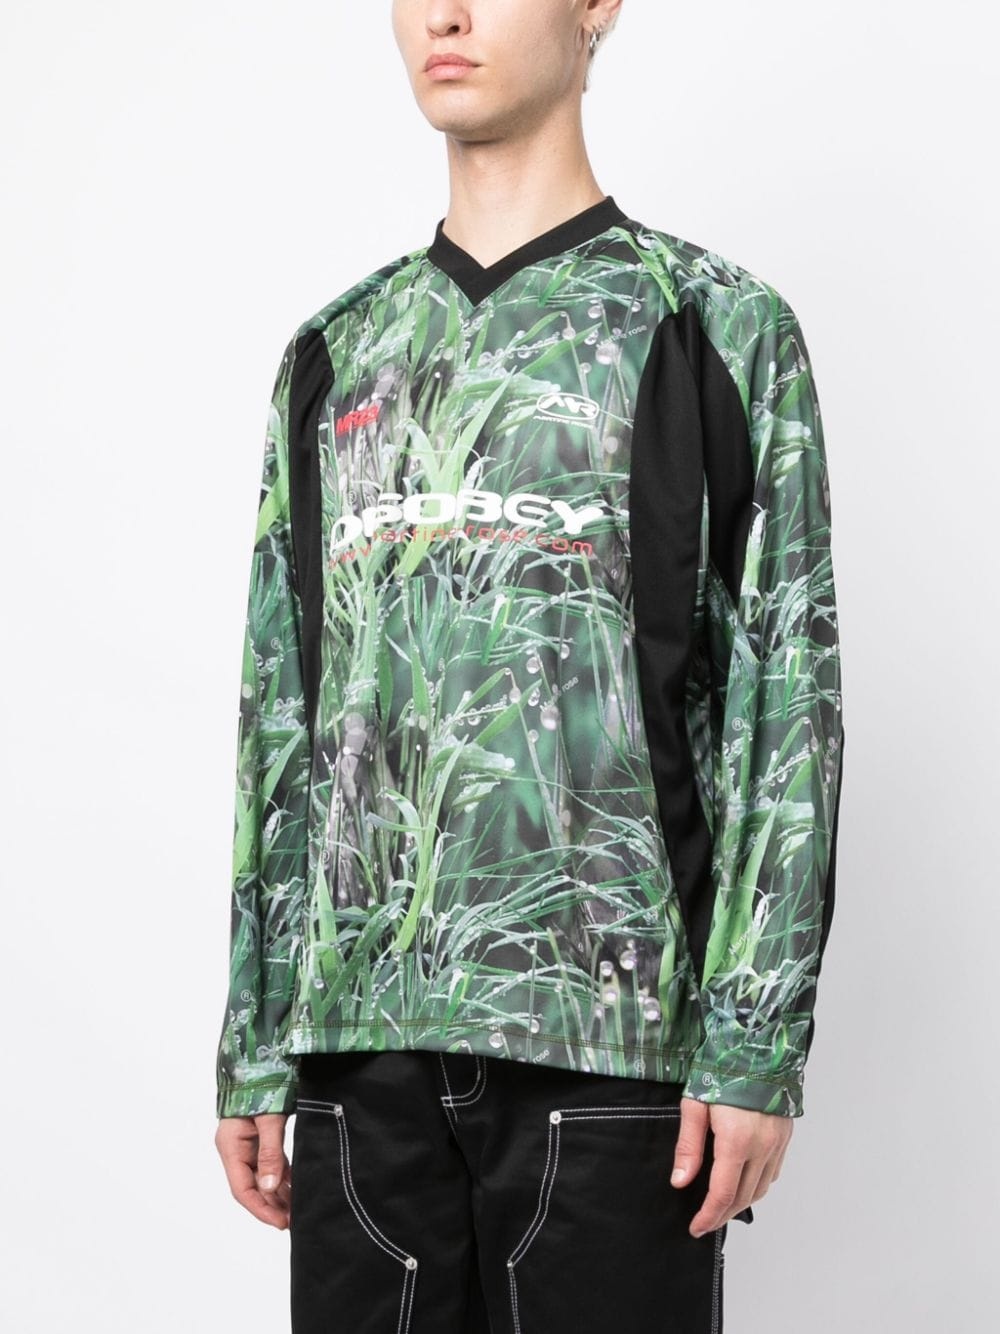 Martine Rose Twisted Football T-Shirt - Green